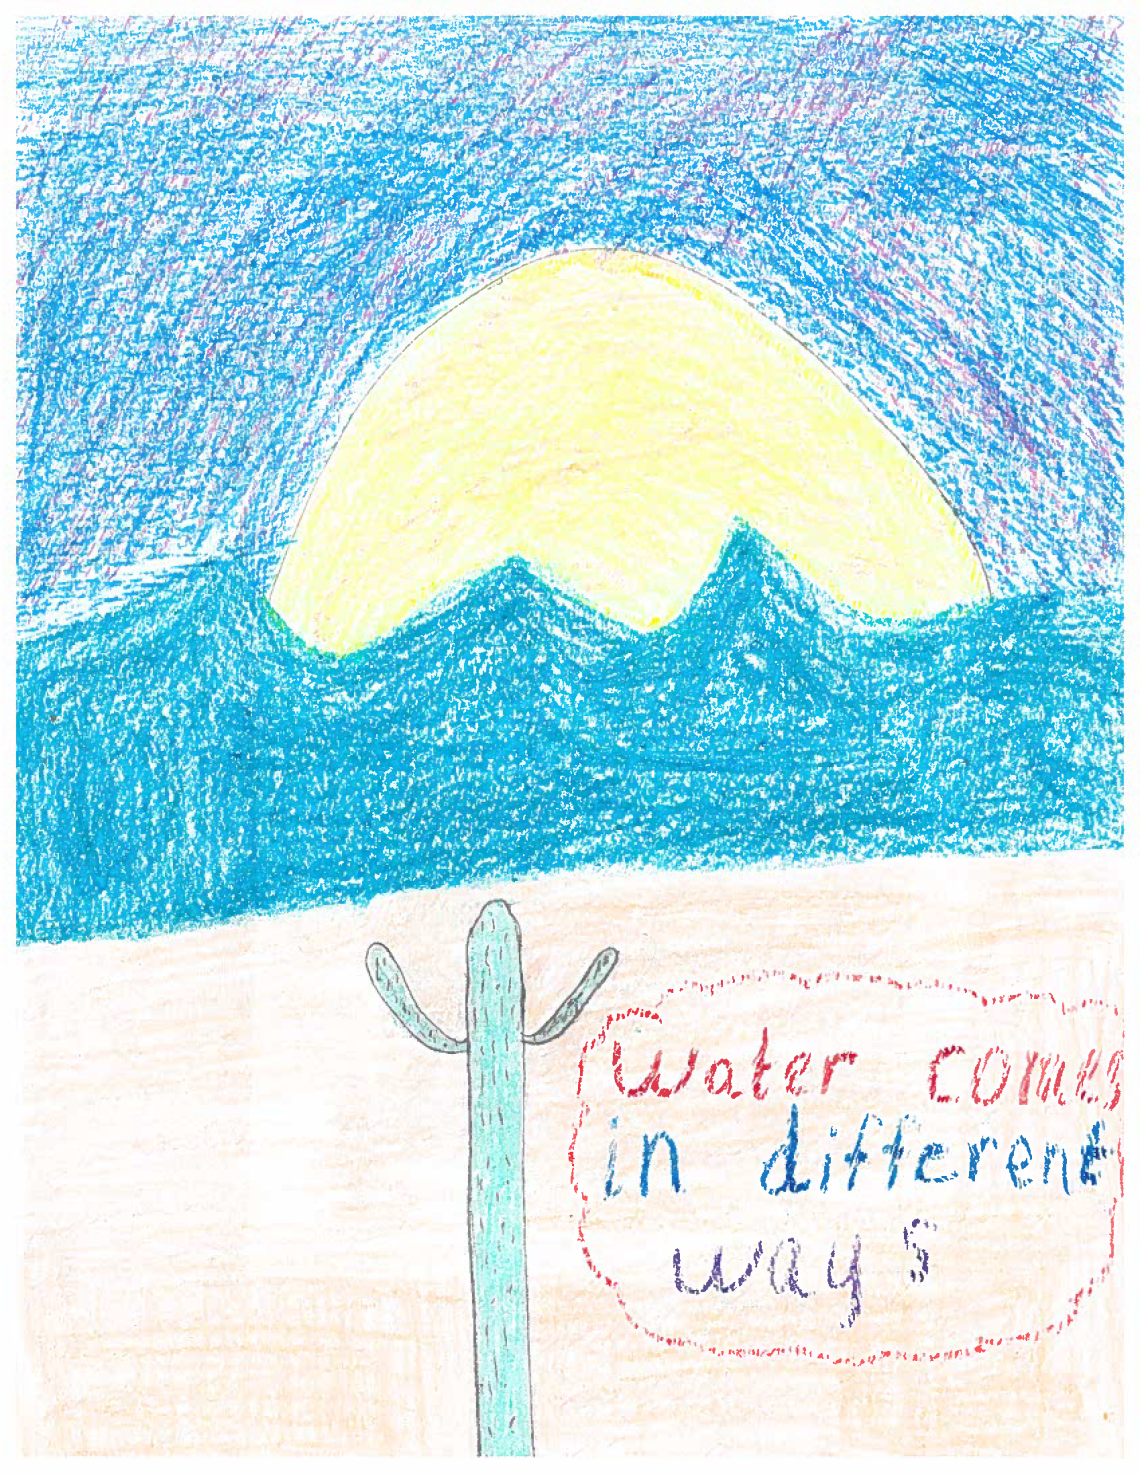 A sun sets in a blue sky with ocean waves in the background. In the foreground is a sandy ground with a saguaro cactus, with the text "Water comes in different ways"